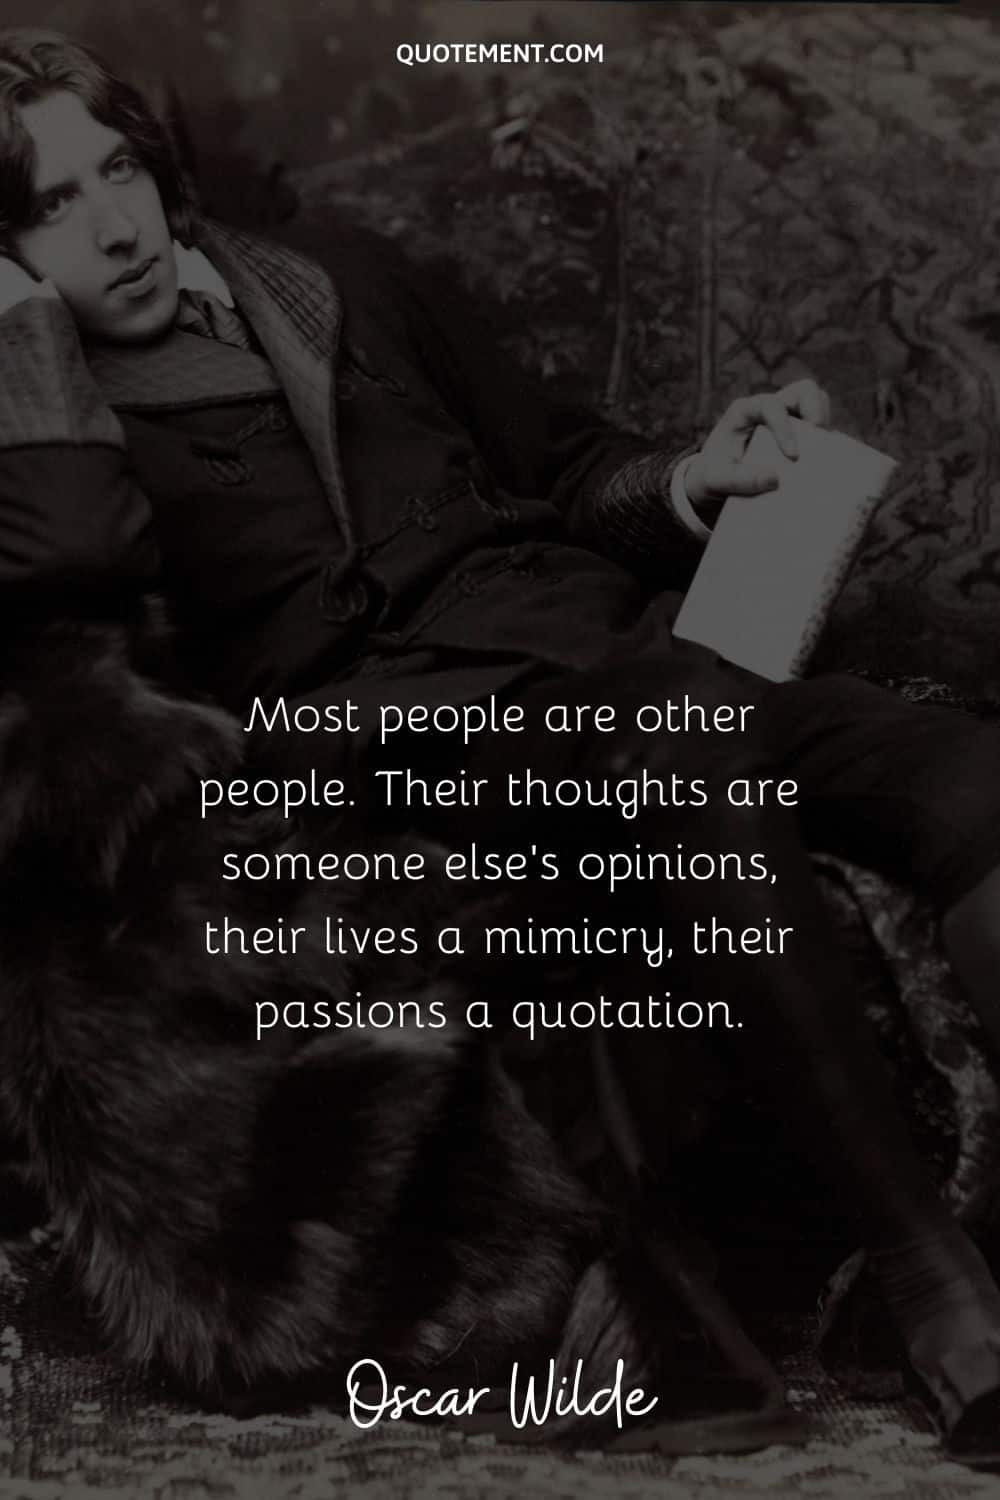 “Most people are other people. Their thoughts are someone else's opinions, their lives a mimicry, their passions a quotation.” ― Oscar Wilde (De Profundis)